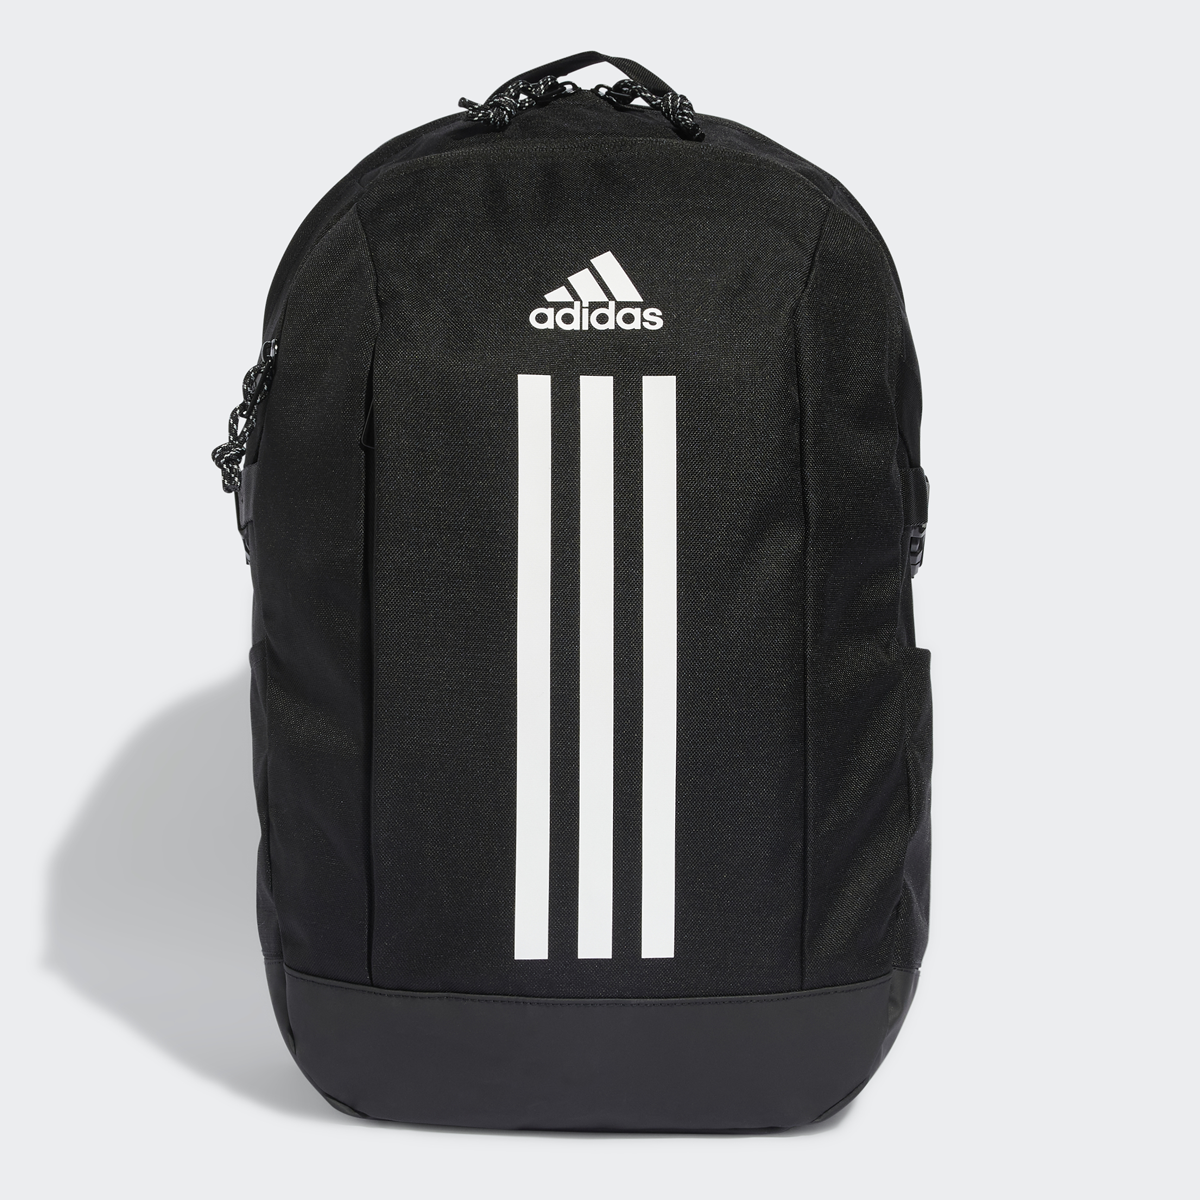 Power VII Backpack, adidas Performance, Bags, black/white, taille: one size